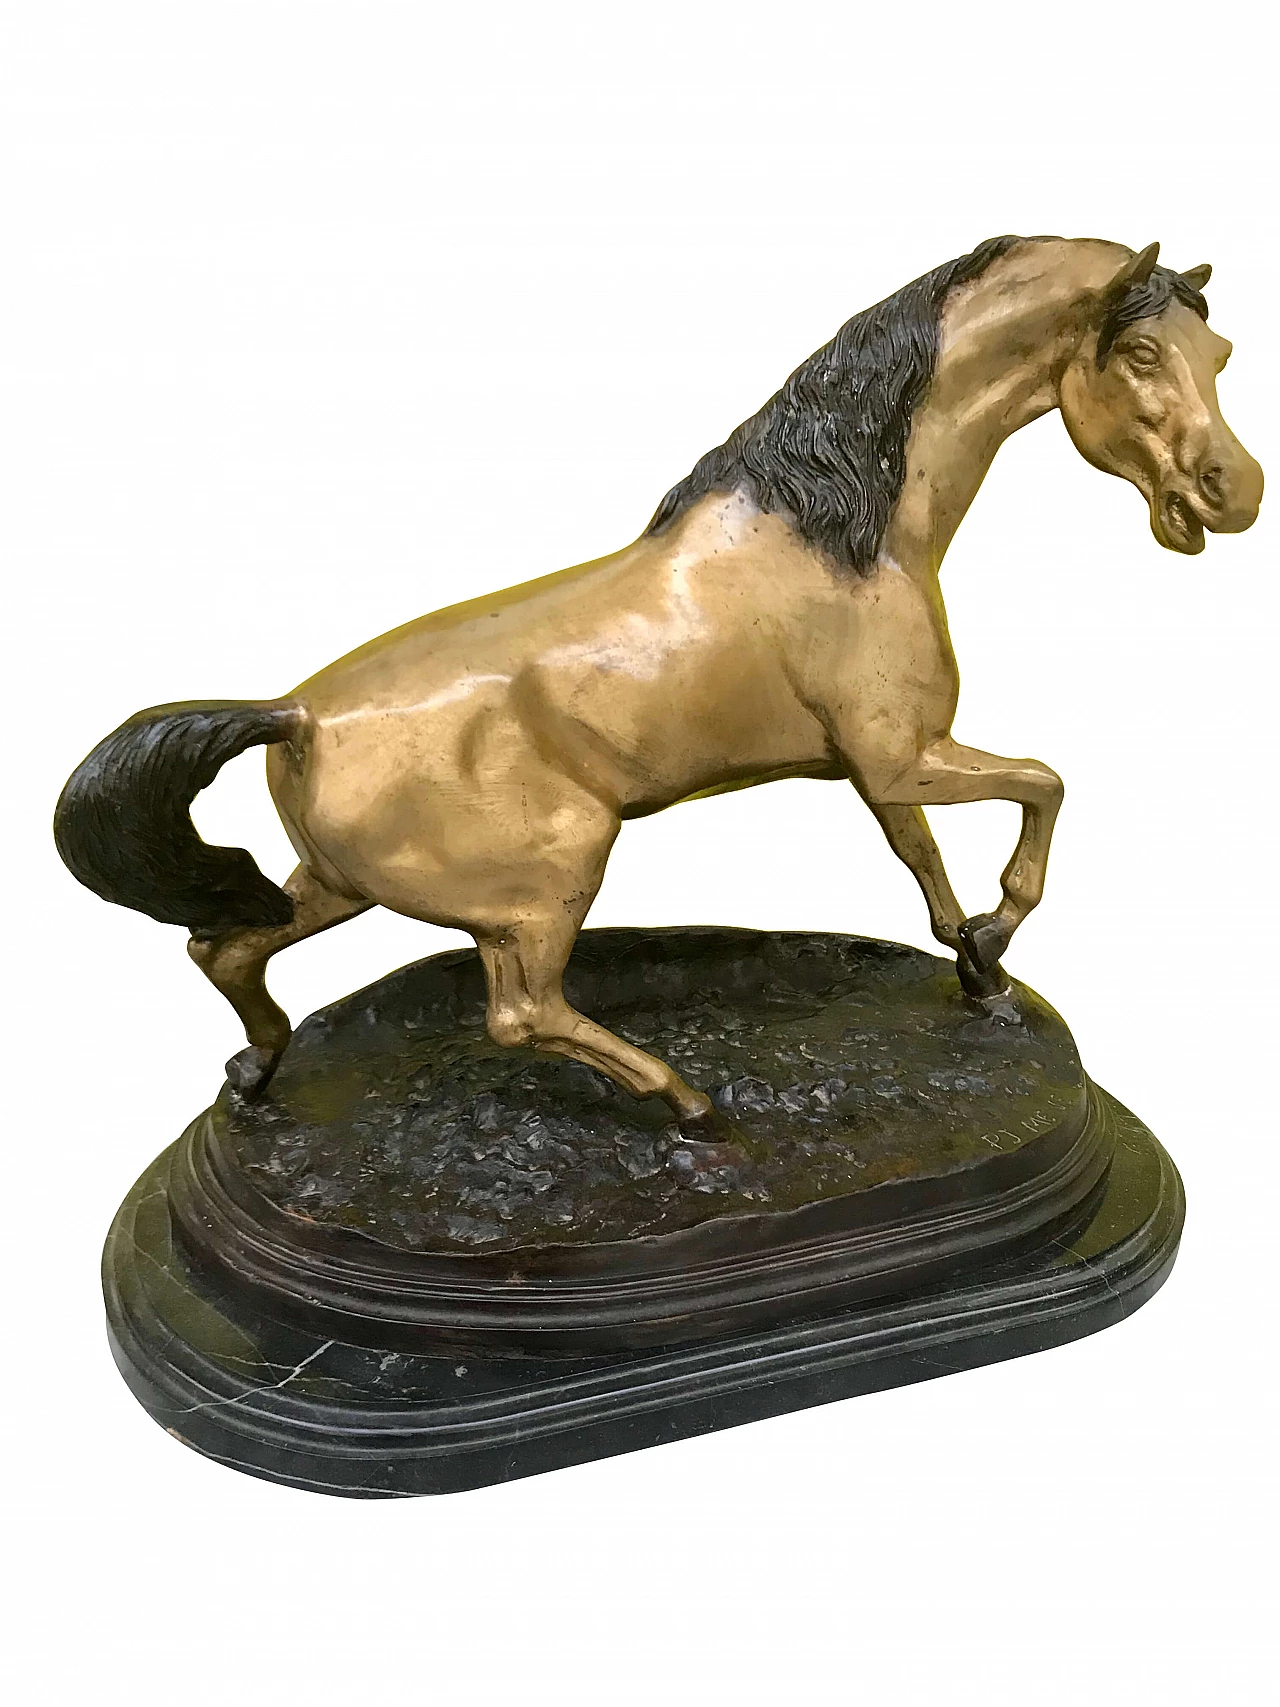 P.J.Mêne, gilded and burnished bronze sculpture of a "Horse" with black marble base, original 19th century 1178221